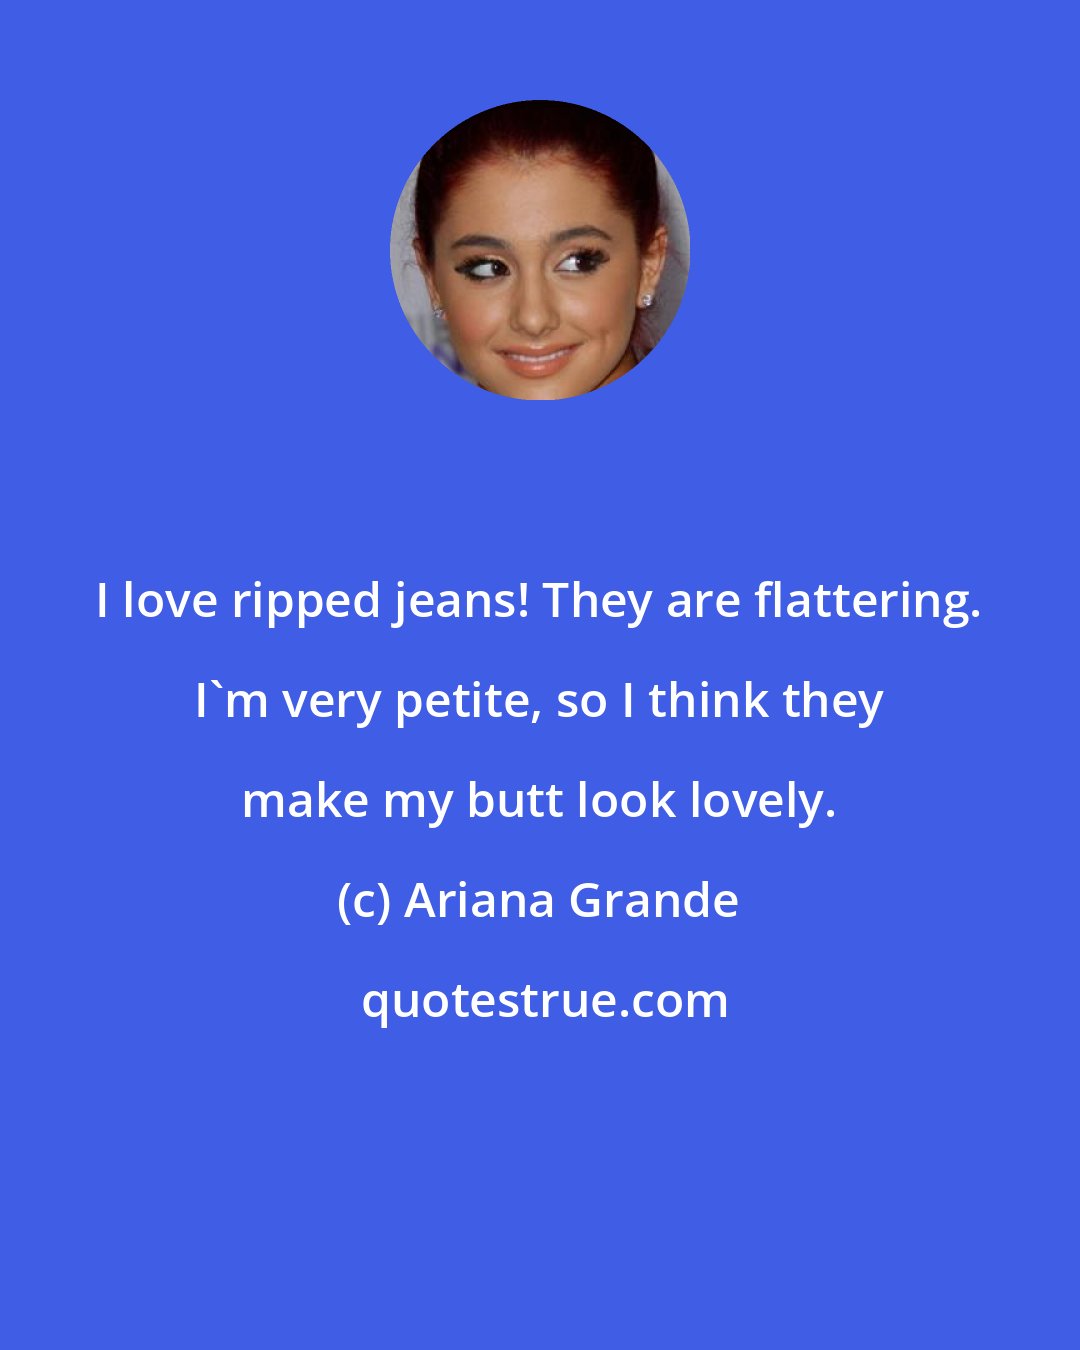 Ariana Grande: I love ripped jeans! They are flattering. I'm very petite, so I think they make my butt look lovely.